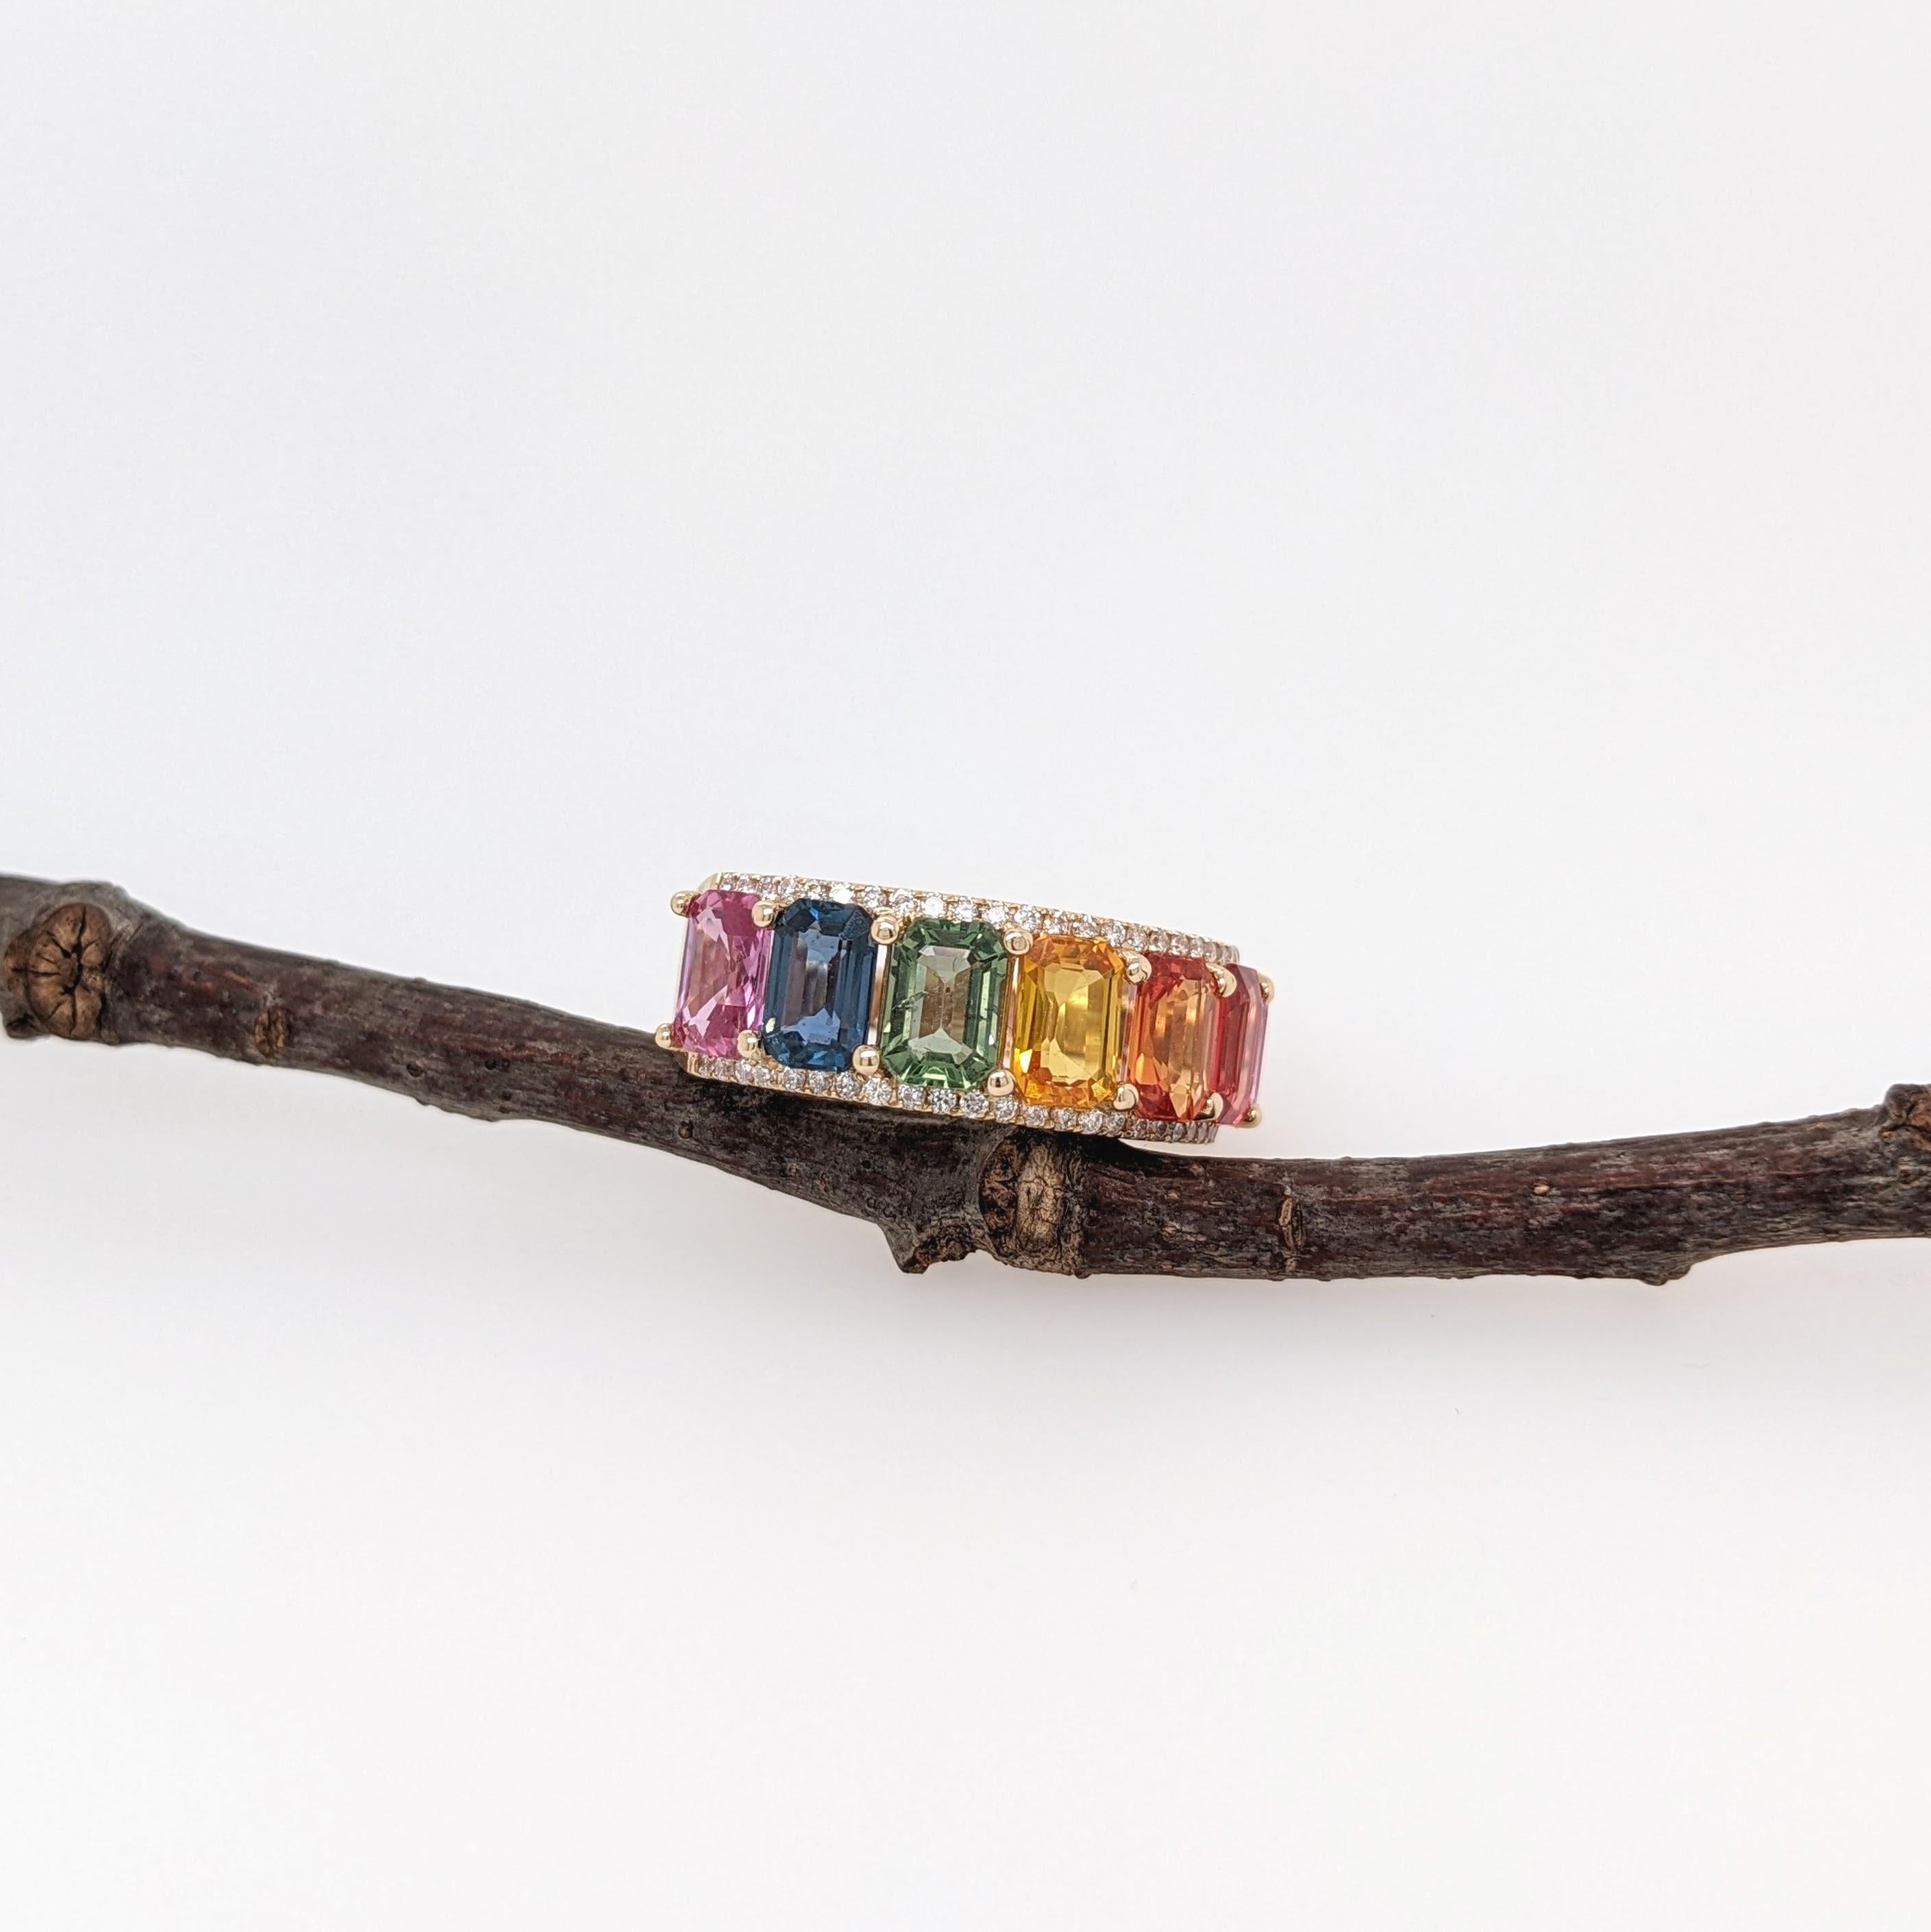 Don the colors of the rainbow with this gorgeous ring featuring 7 emerald cut sapphires in the colors of pink, blue, green, yellow, orange and red! Rows of earth mined natural diamonds bring an extra sparkle to this gorgeous statement piece, set in